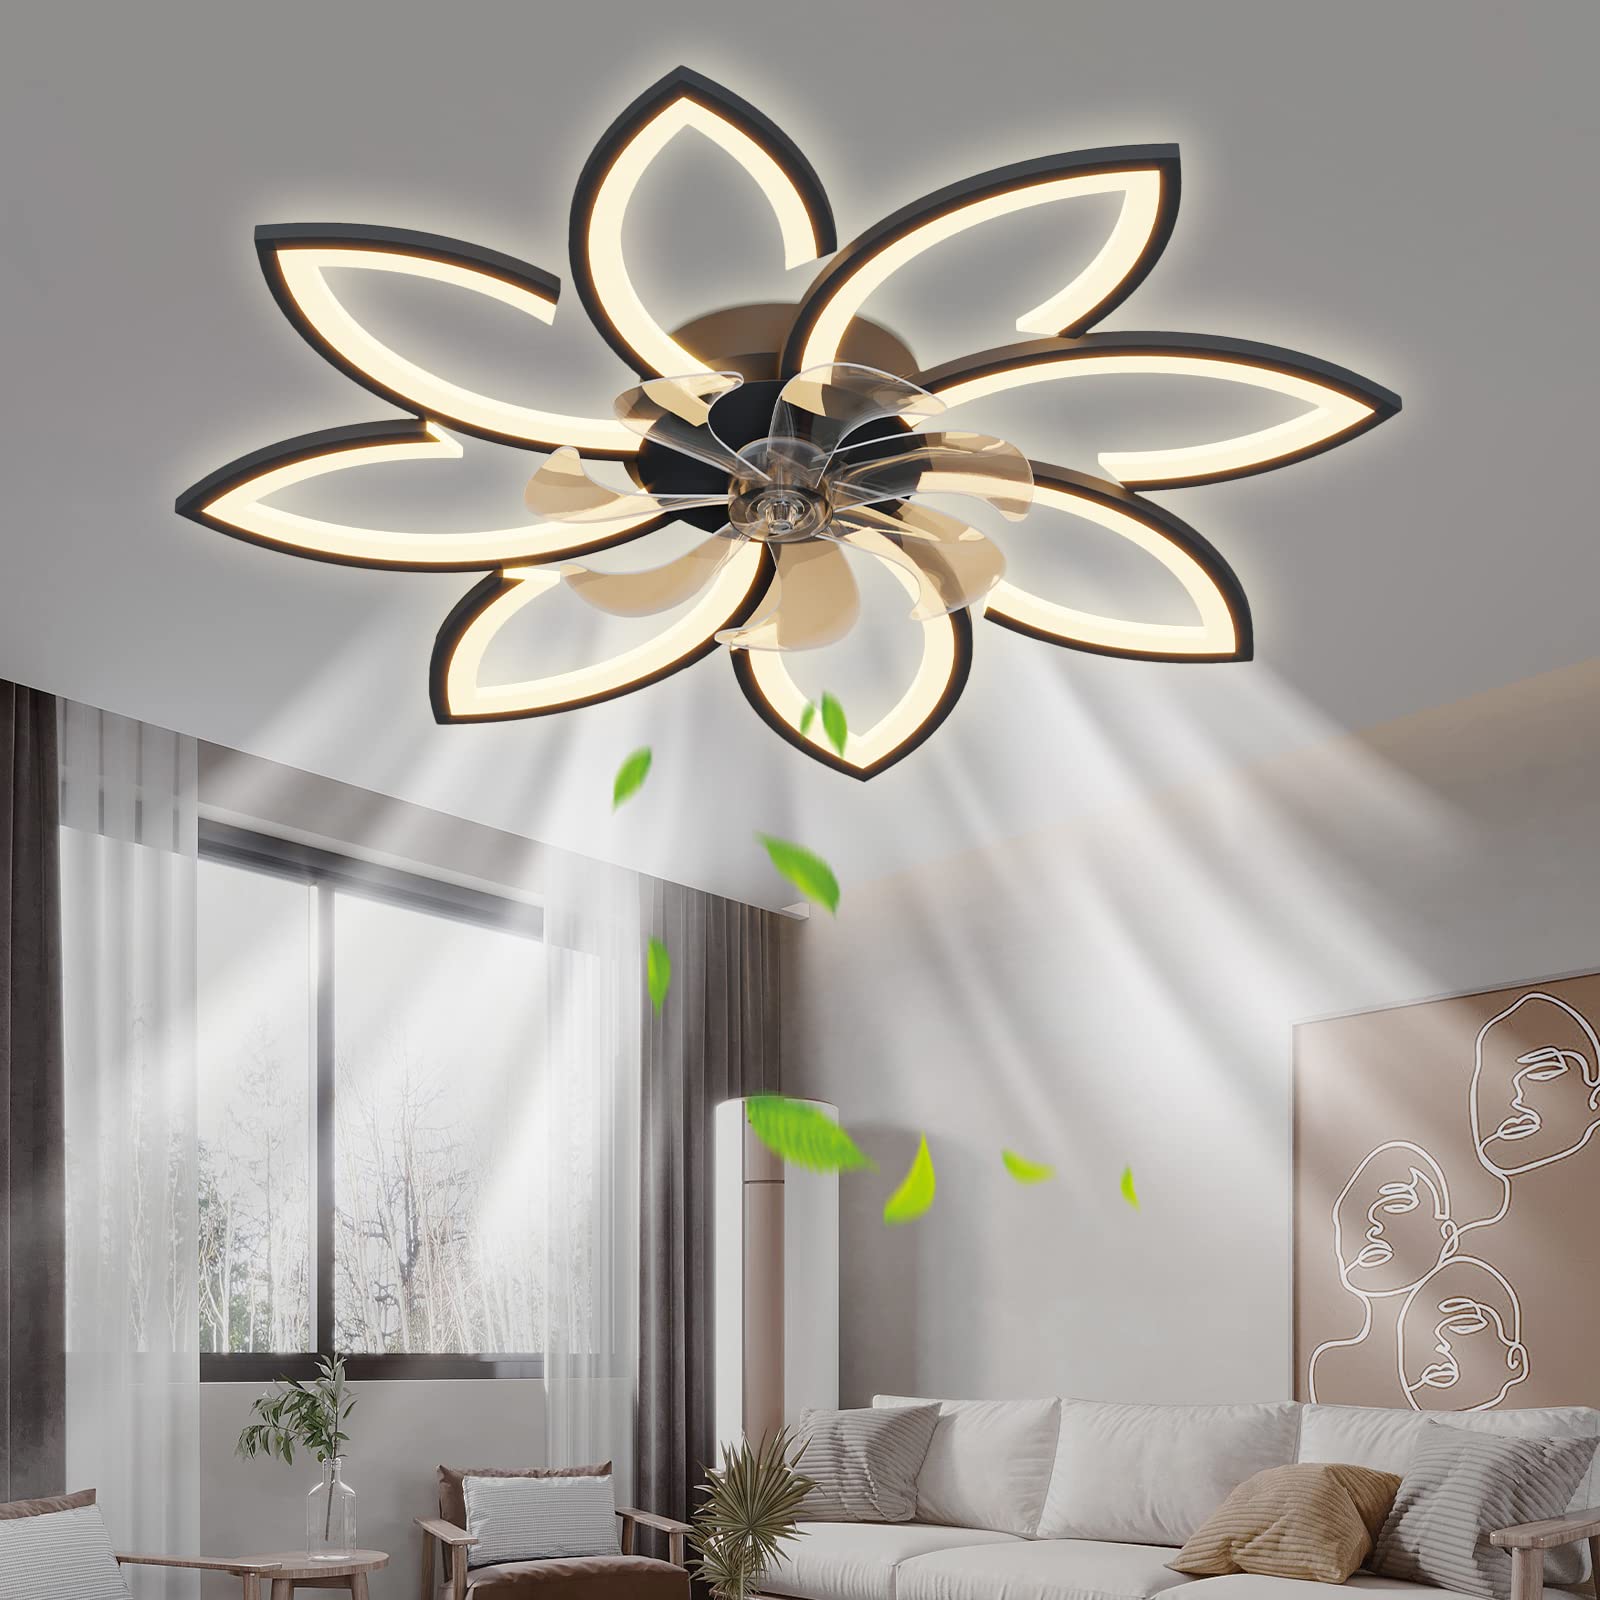 35''Ceiling Fans with Lights, Modern Ceiling Fan with Lights and Remote, Dimmable Bladeless Ceiling Fans LED Light, Low Profile Ceiling Fan 6 Speed Reversible Blades Timing, for Bedroom (Black)